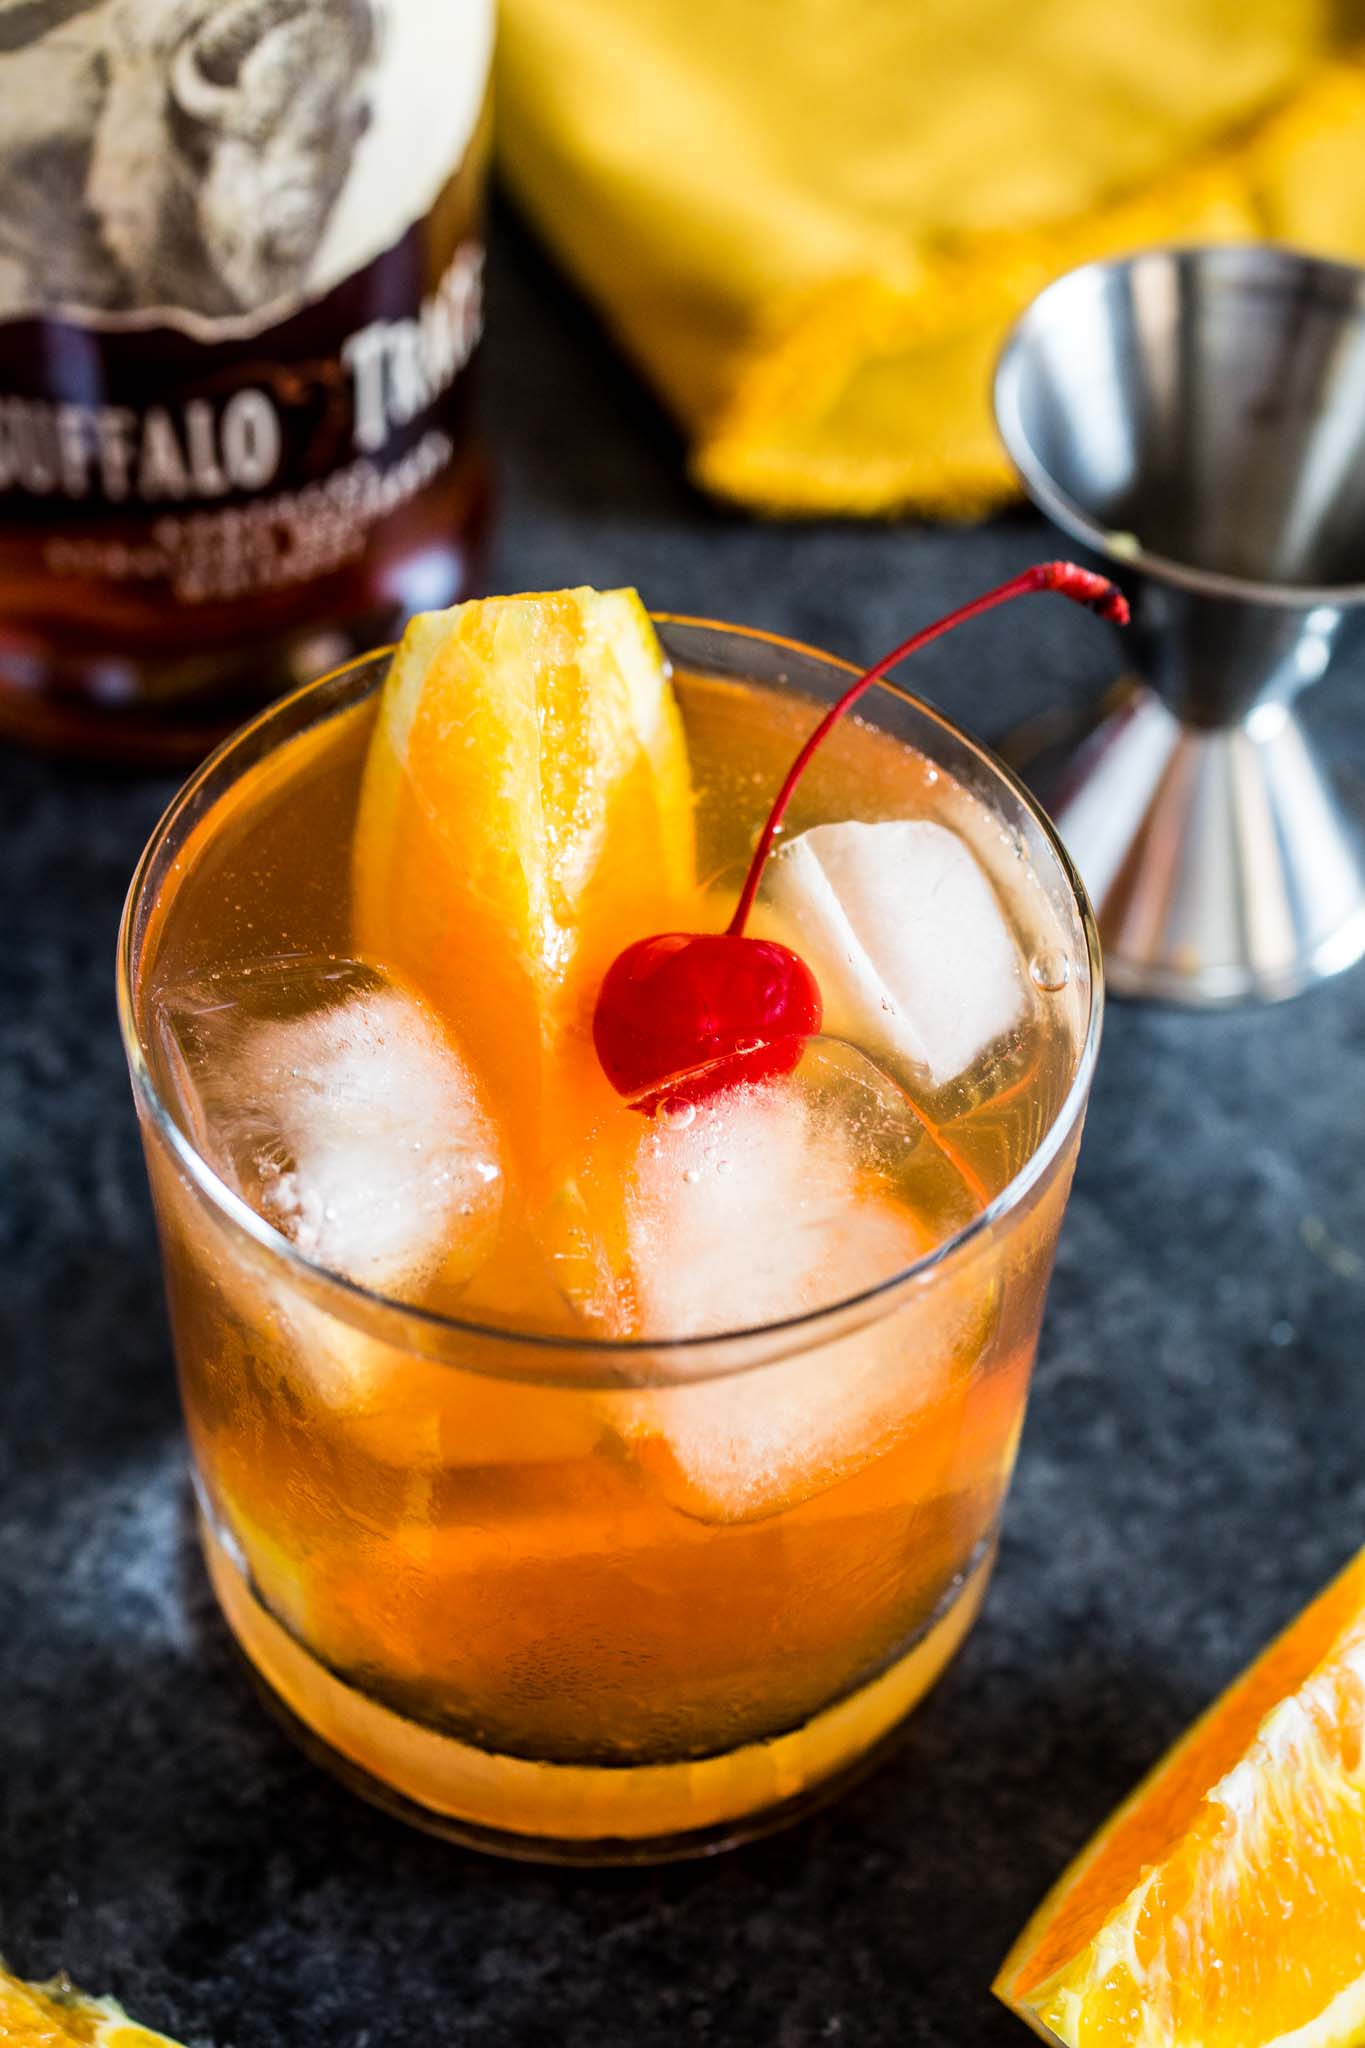 Bourbon Old Fashioned | www.oliviascuisine.com | A classic bourbon cocktail made with sugar, bitters and a good quality bourbon. Perfect for Father's Day!